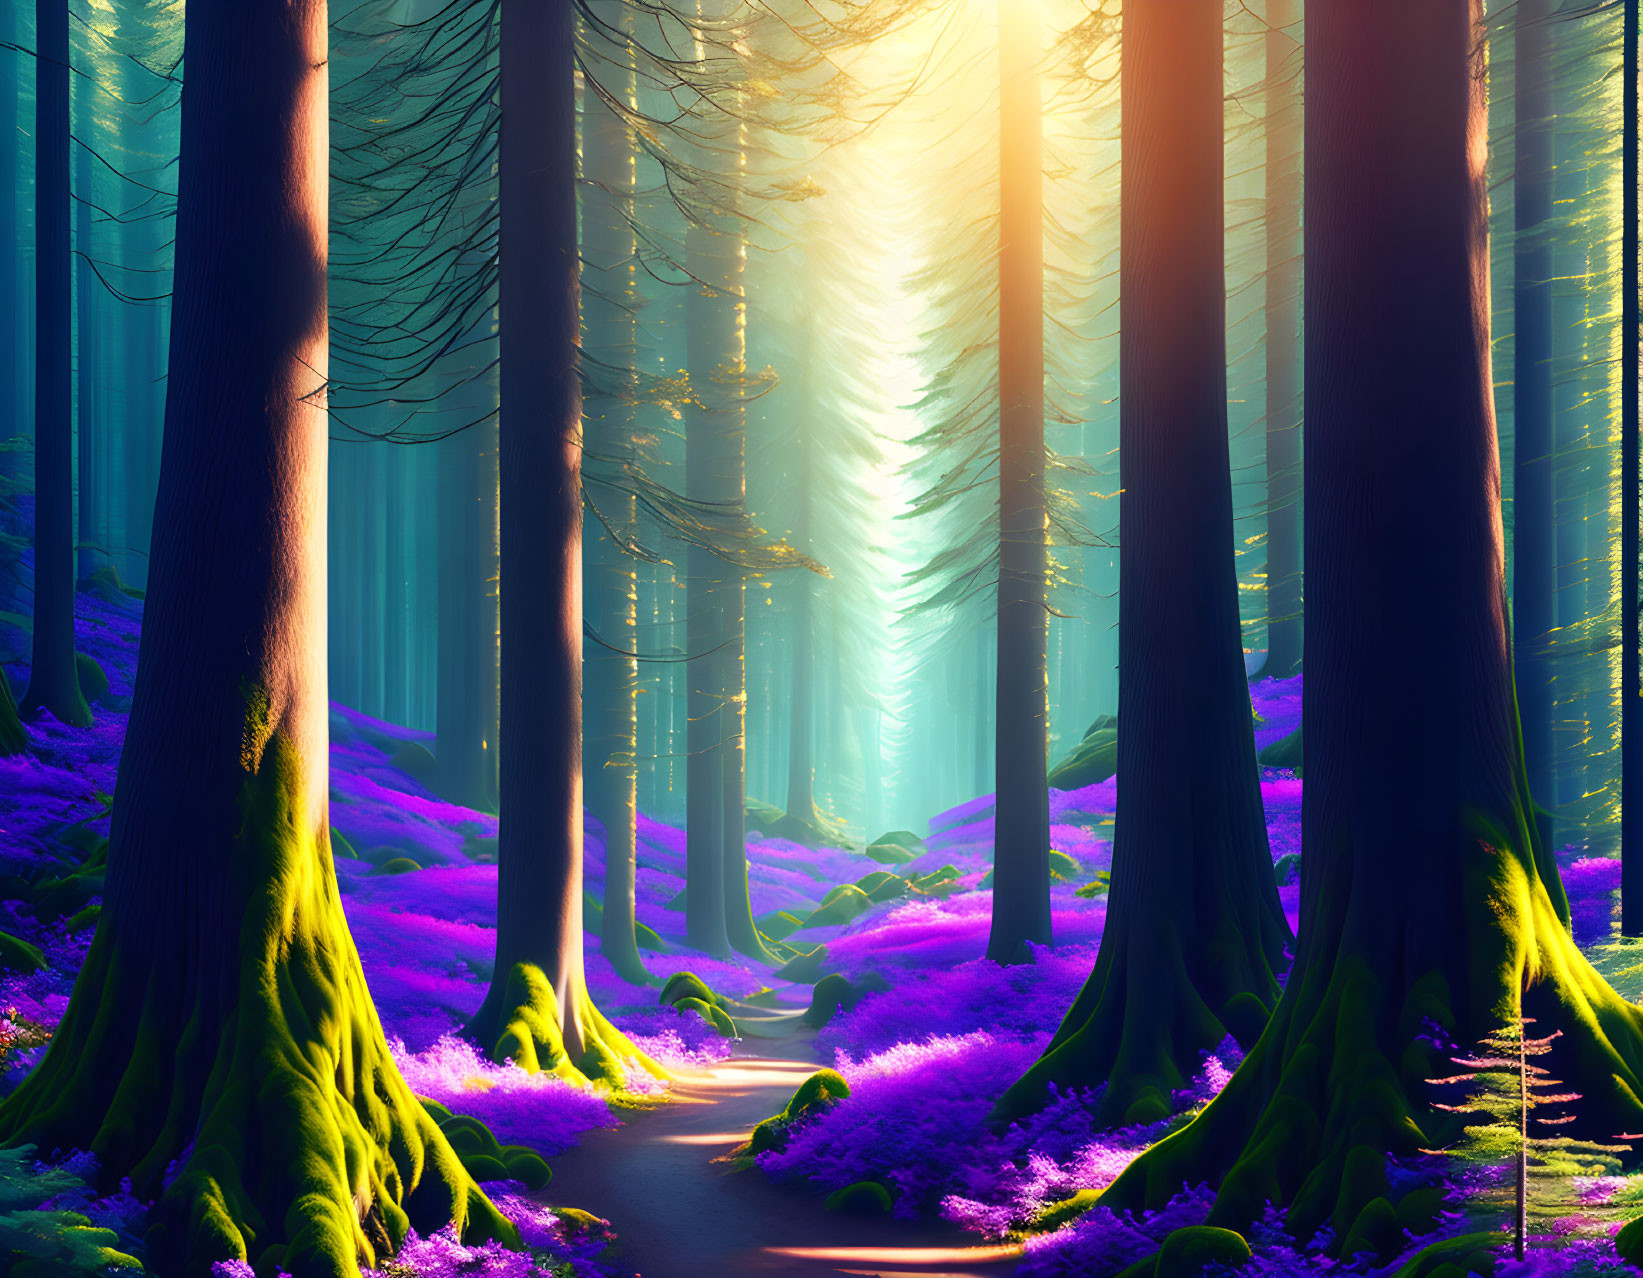 Vibrant forest with towering trees and purple foliage under sunlight